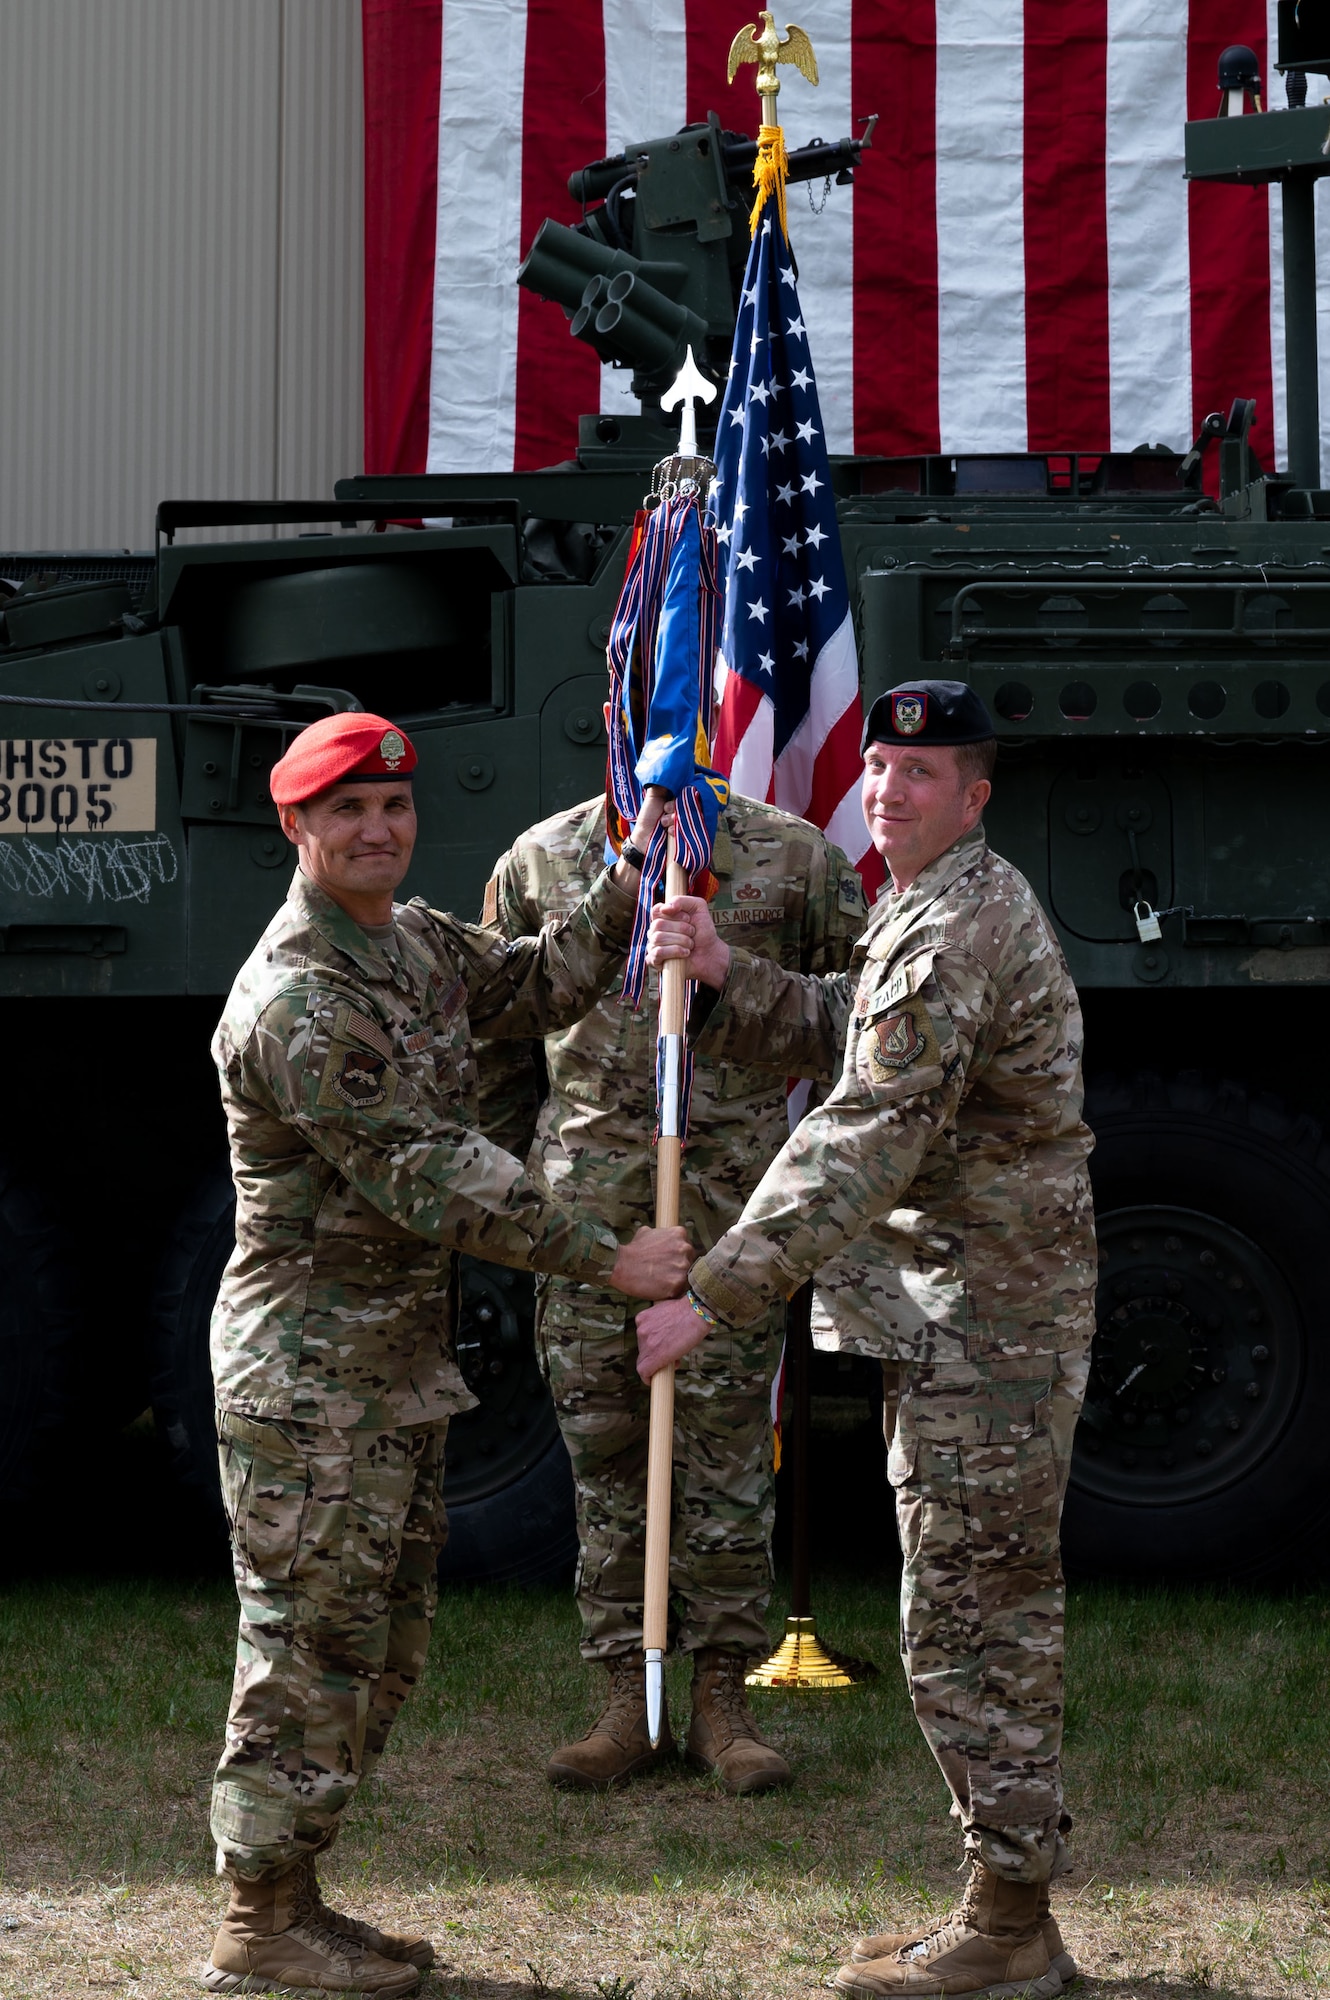 U.S. Air Force Col. Travis Woodworth (left), the 1st Air Support Operations Group commander, passes the 3rd Air Support Operations Squadron (ASOS) guidon to Lt. Col. Kyle Mattie, the 3rd ASOS commander, during a change of command ceremony at Fort Wainwright, Alaska, June 4, 2021.